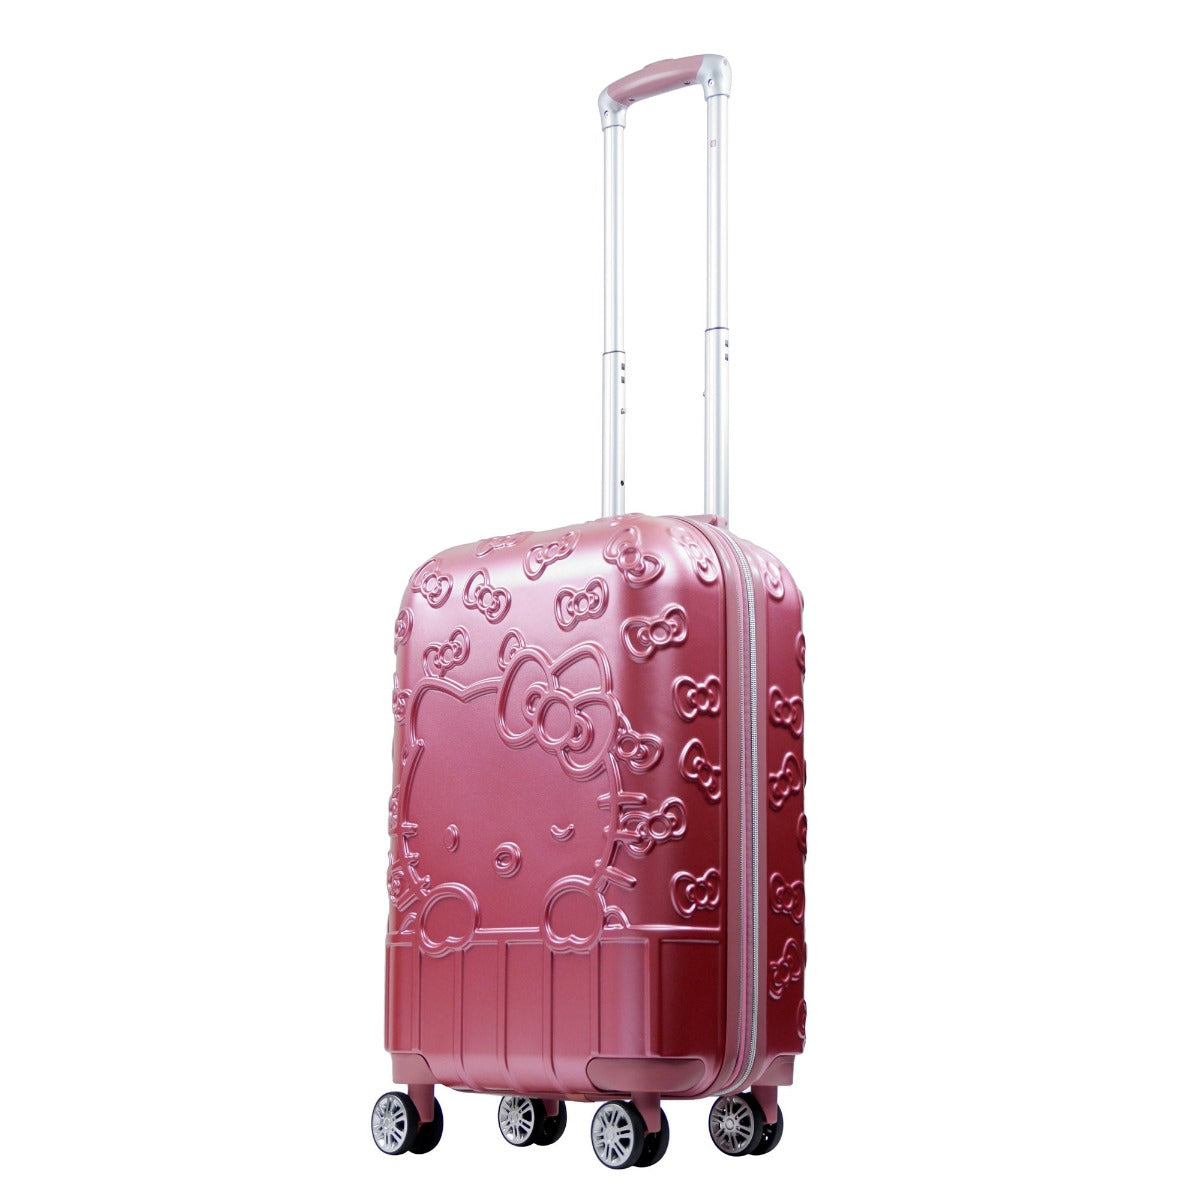 Ful X Hello Kitty Molded Portrait 22.5" pink carry-on luggage spinner suitcase